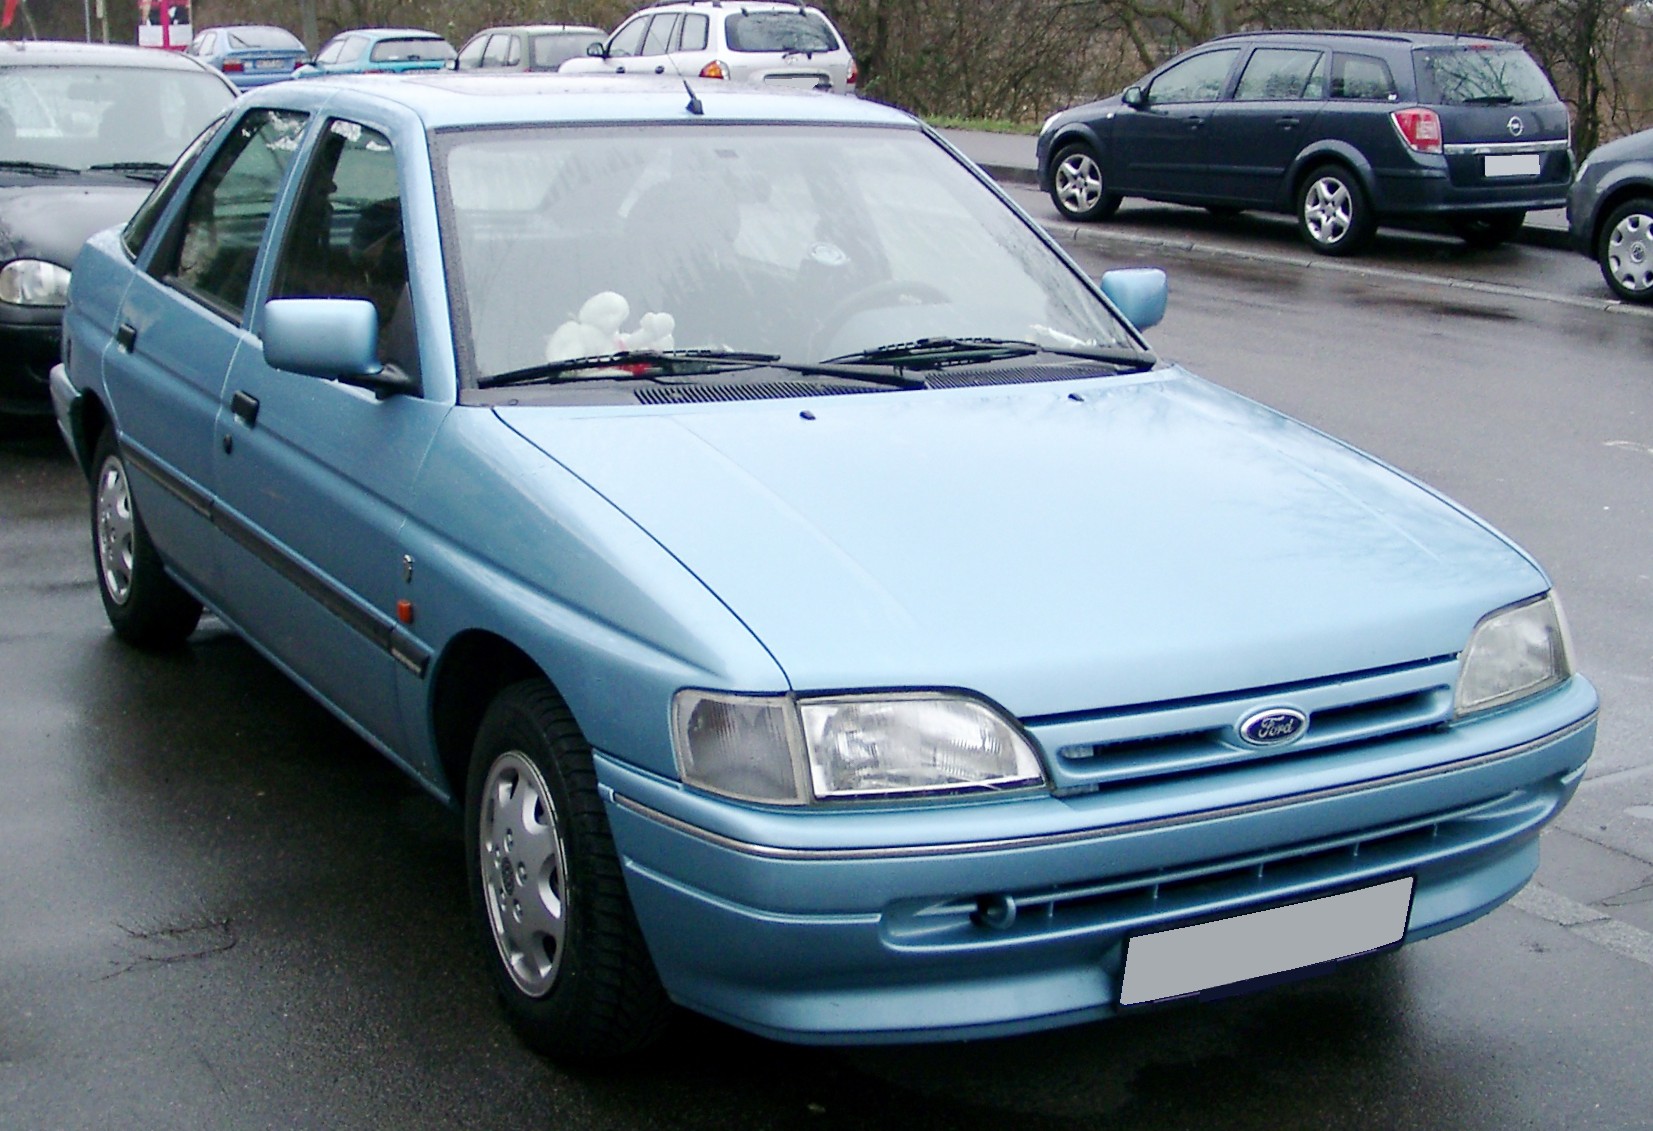 top 10 worst cars of all time: Ford Escort